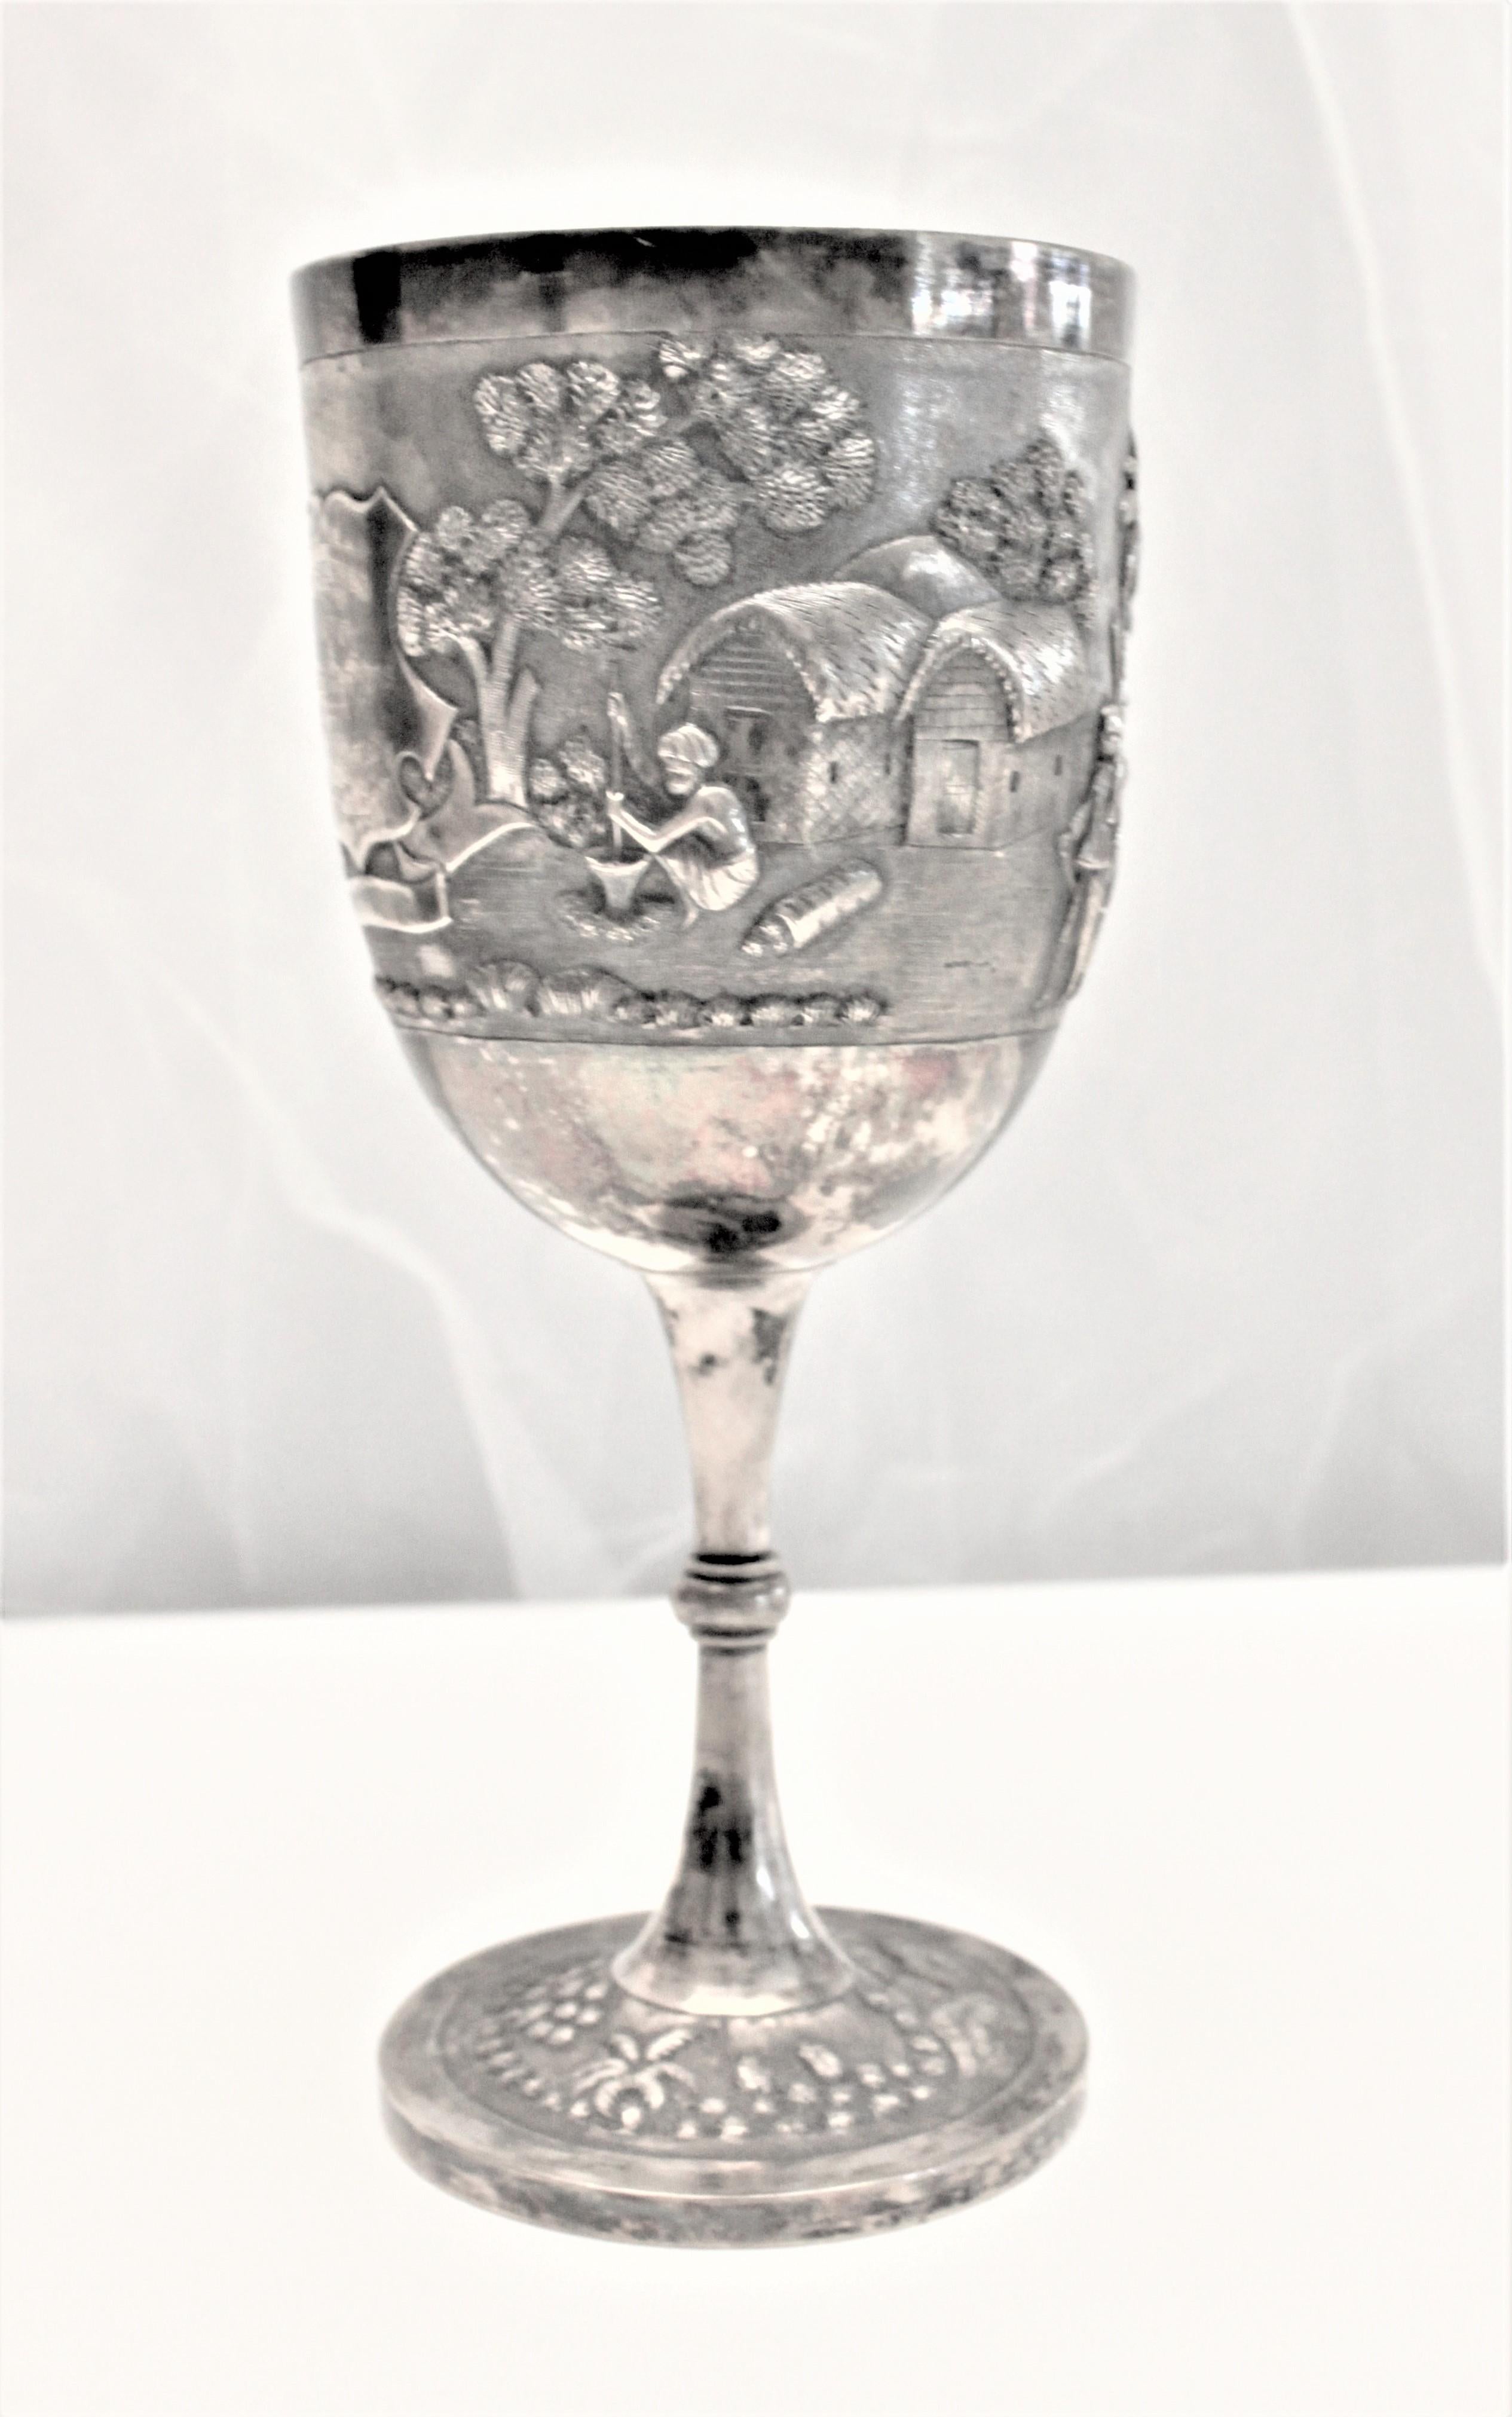 Presumed to have been made in India in the early 20th century, this solid silver trophy goblet is very ornately decorated in the Anglo-Indian style in a combination of repousse and chased work depicting village life. The shield on the front is